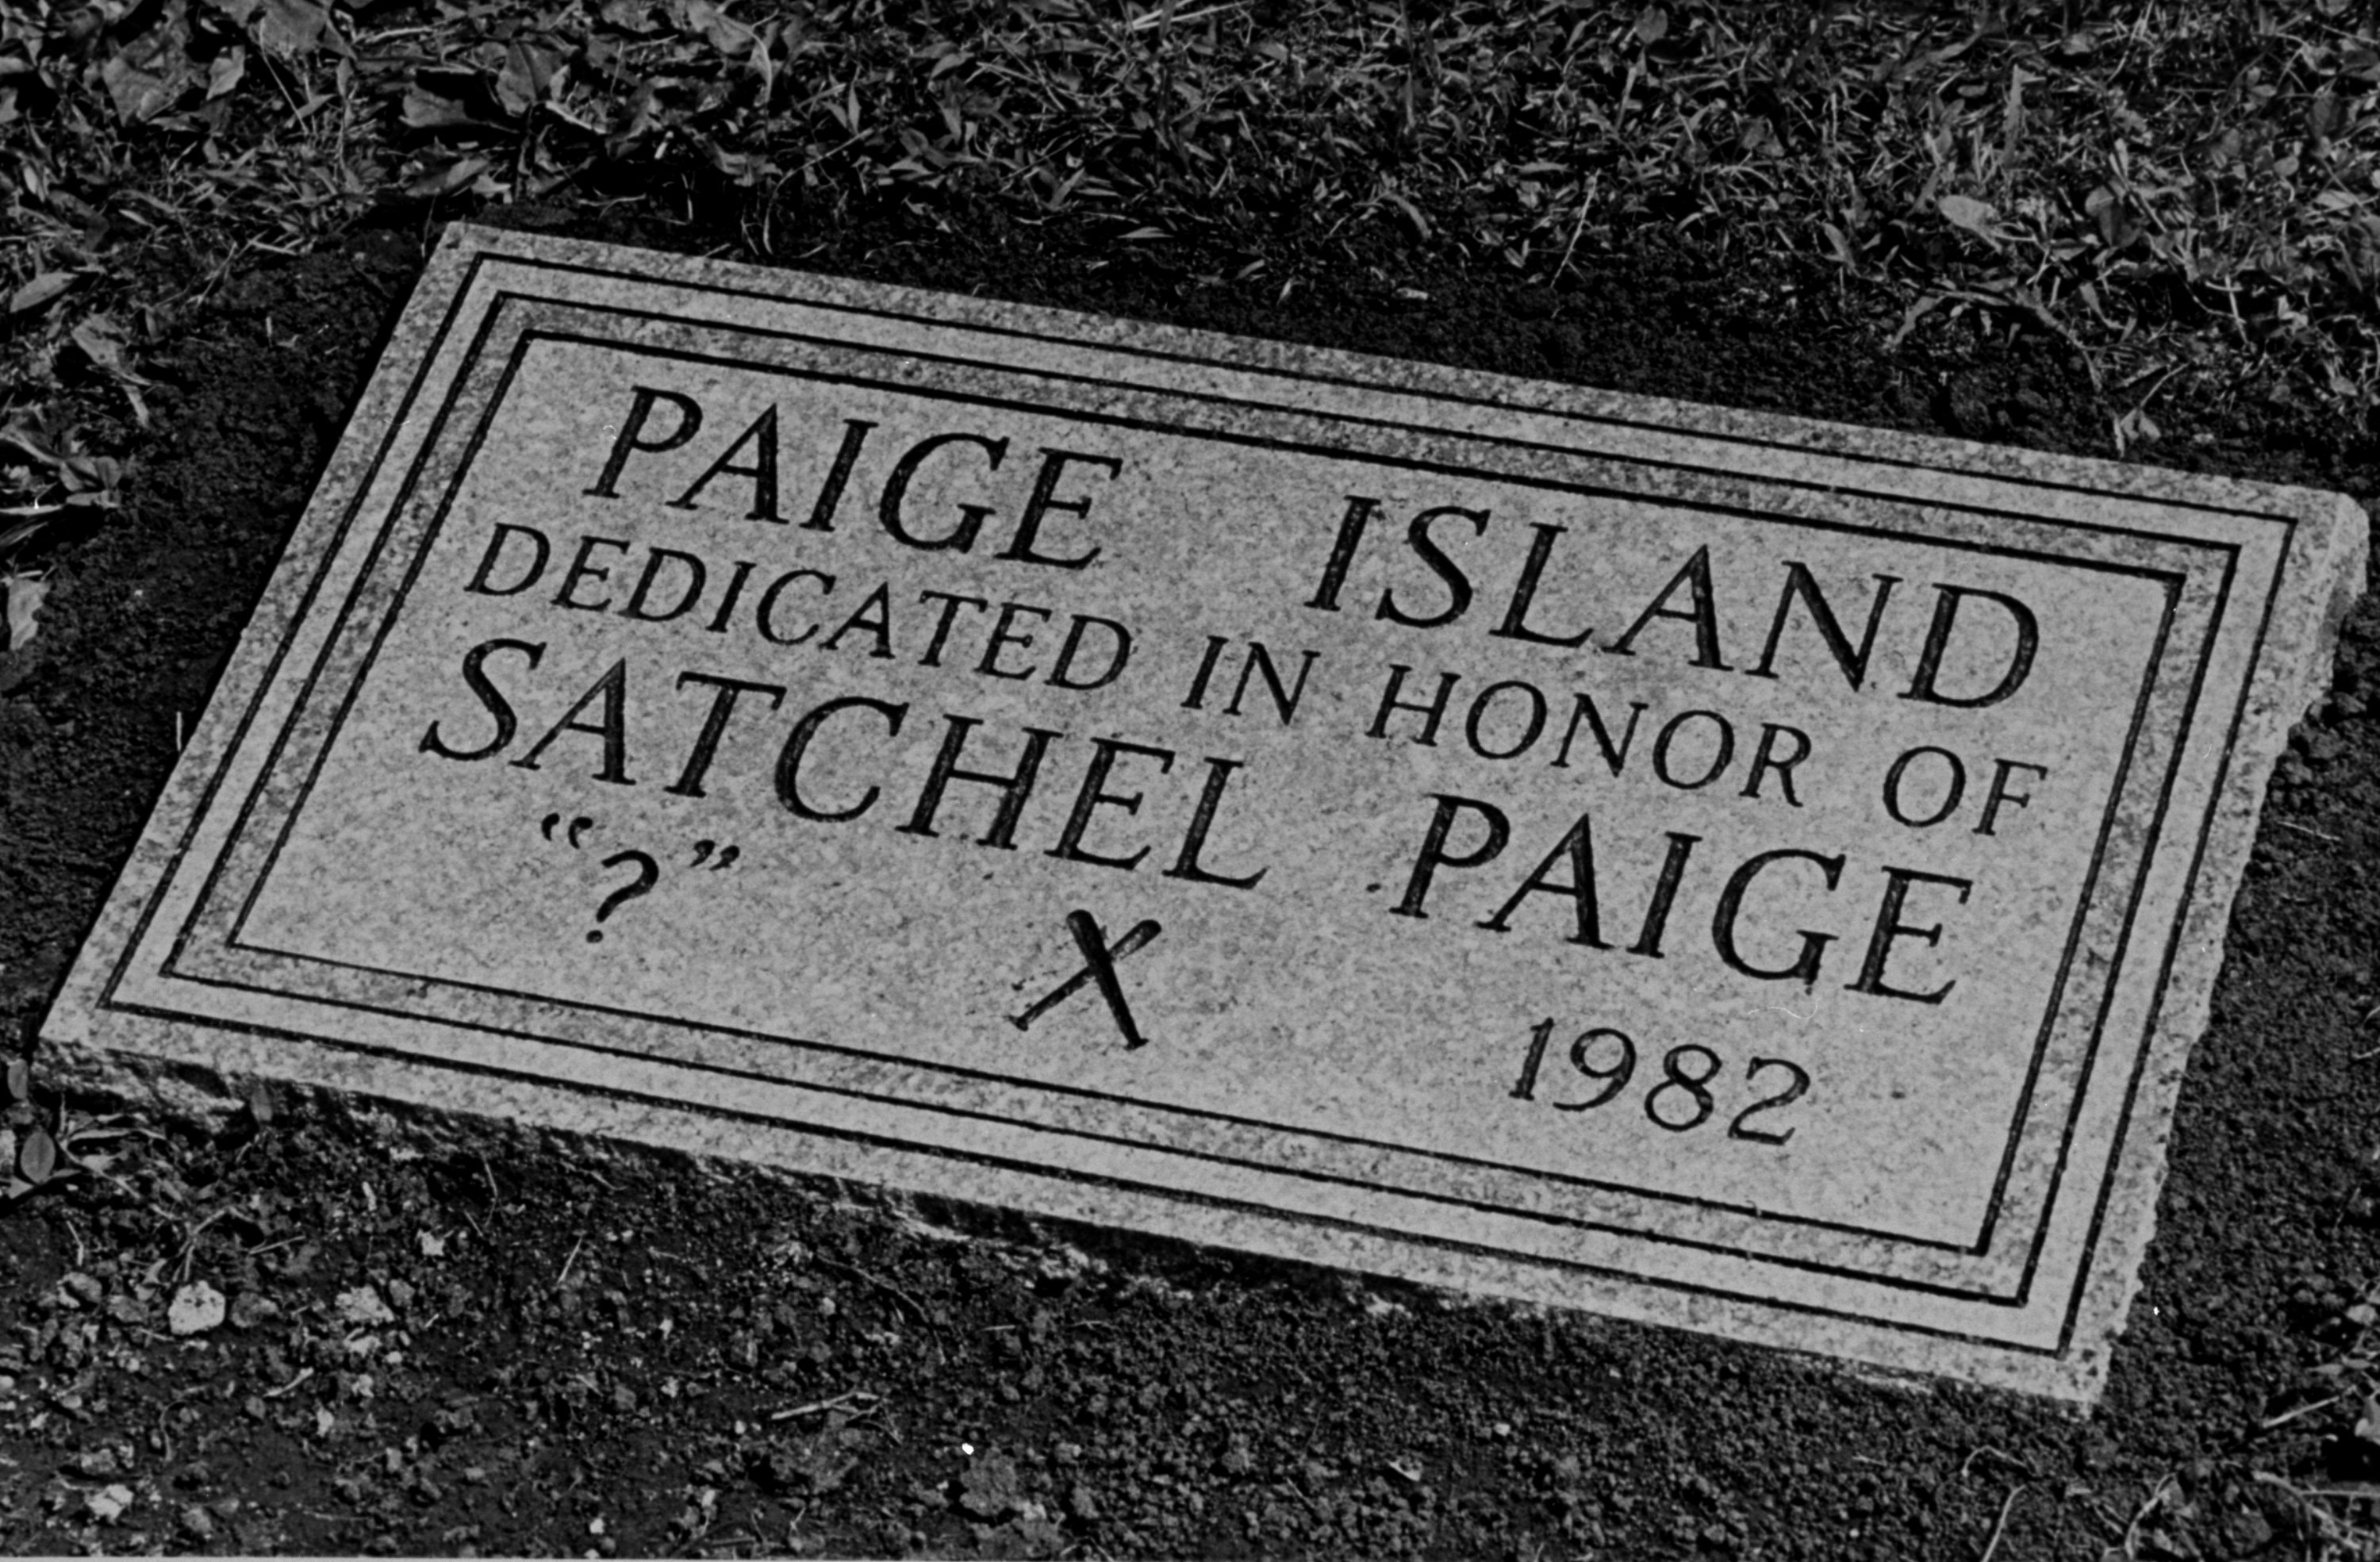 A stone marking the site of the grave of Hall of Famer Satchel Paige sits on the edge of a donated piece of land where Paige was laid to rest on June 12, 1982. Paige and his wife will be the only people buried on the land, which is surrounded on all sides by roads. A question mark was used instead of a date for his birth because, at the time, the actual date of his birth is unknown. Paige's birth certificate states that he was born on July 7, 1906.